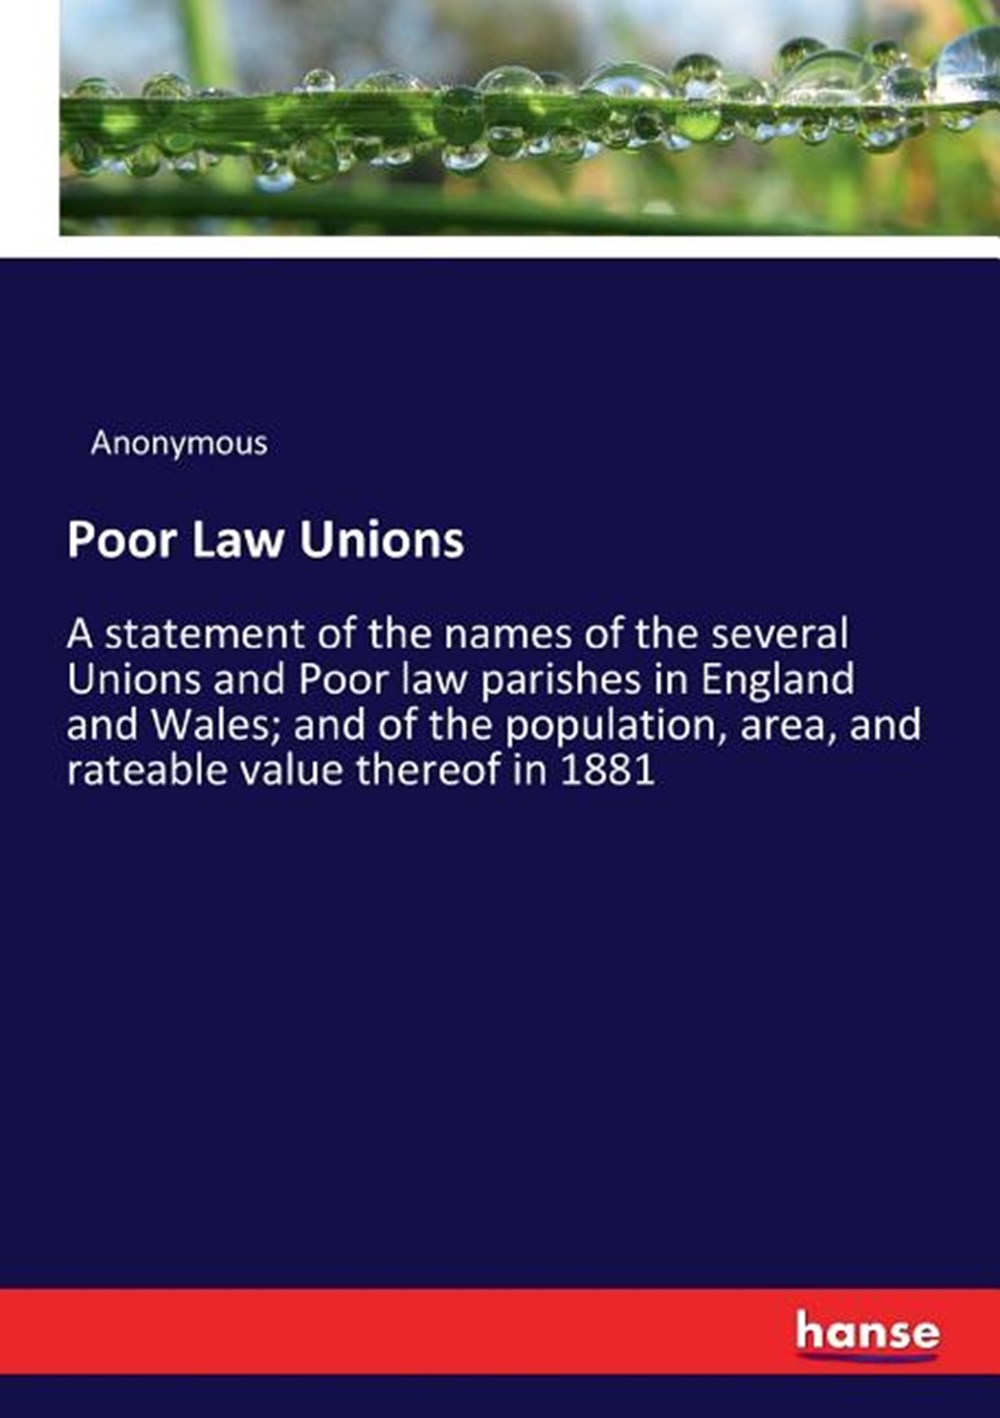 Poor Law Unions: A statement of the names of the several Unions and Poor law parishes in England and